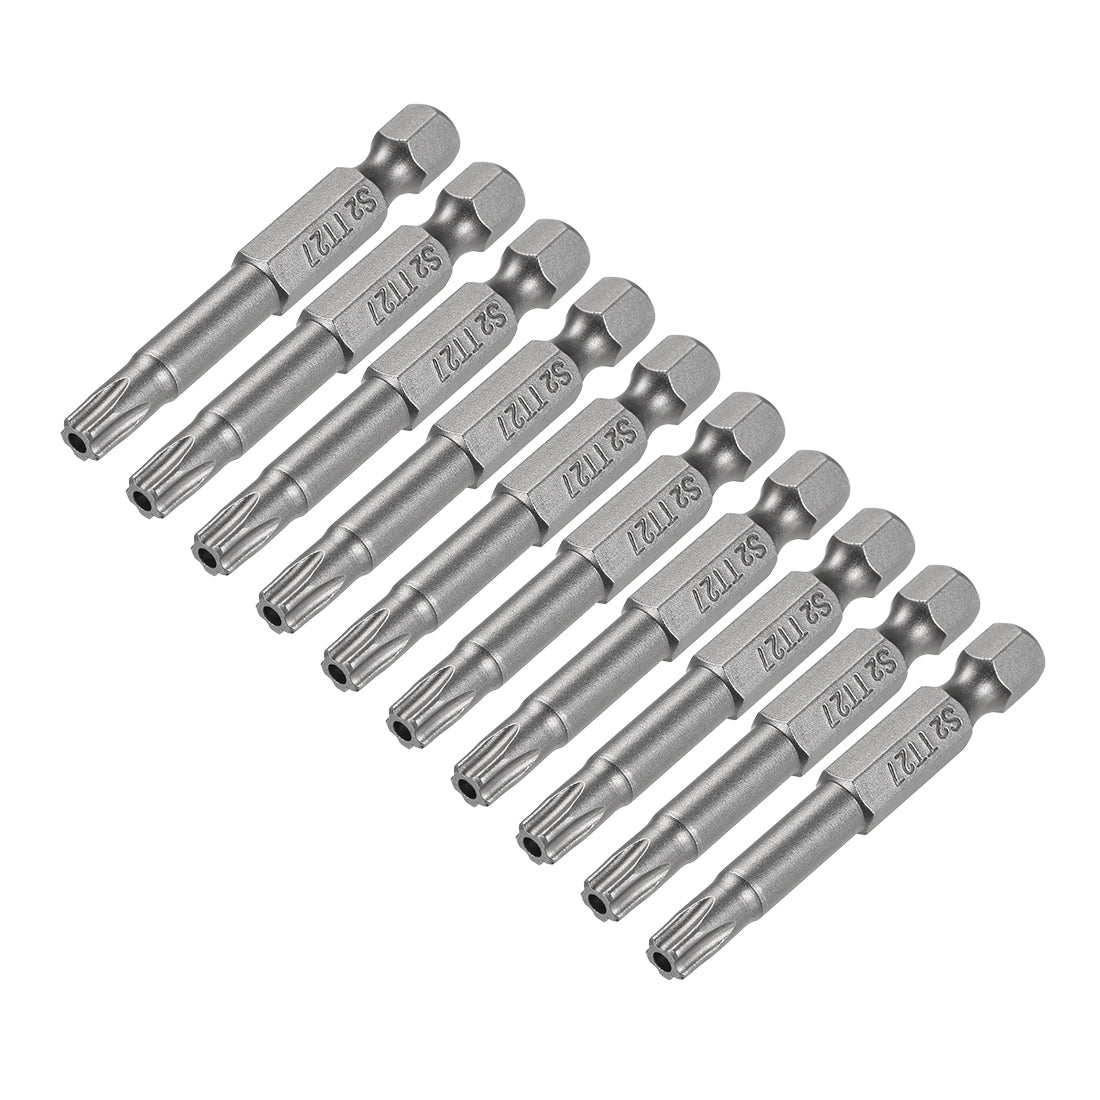 uxcell Uxcell 50mm Long 1/4inch Hex Shank T27 Torx Security Star Screwdriver Bits S2 High Alloy Steel 10pcs